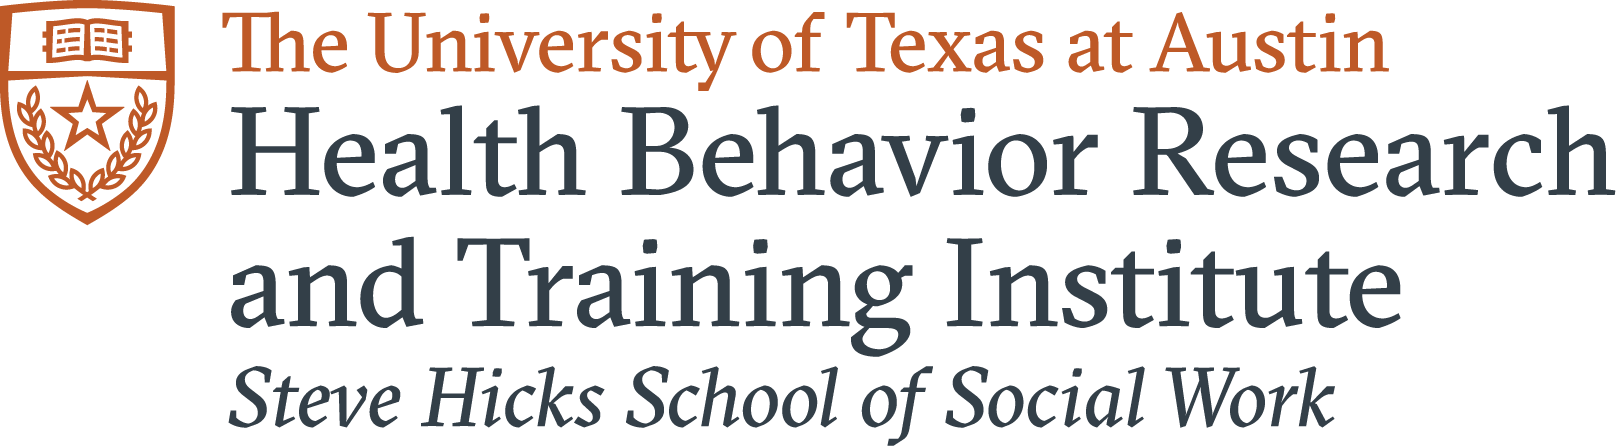 The University of Texas at Austin Health Behavior Research and Training Institute Steve Hicks School of Social Work